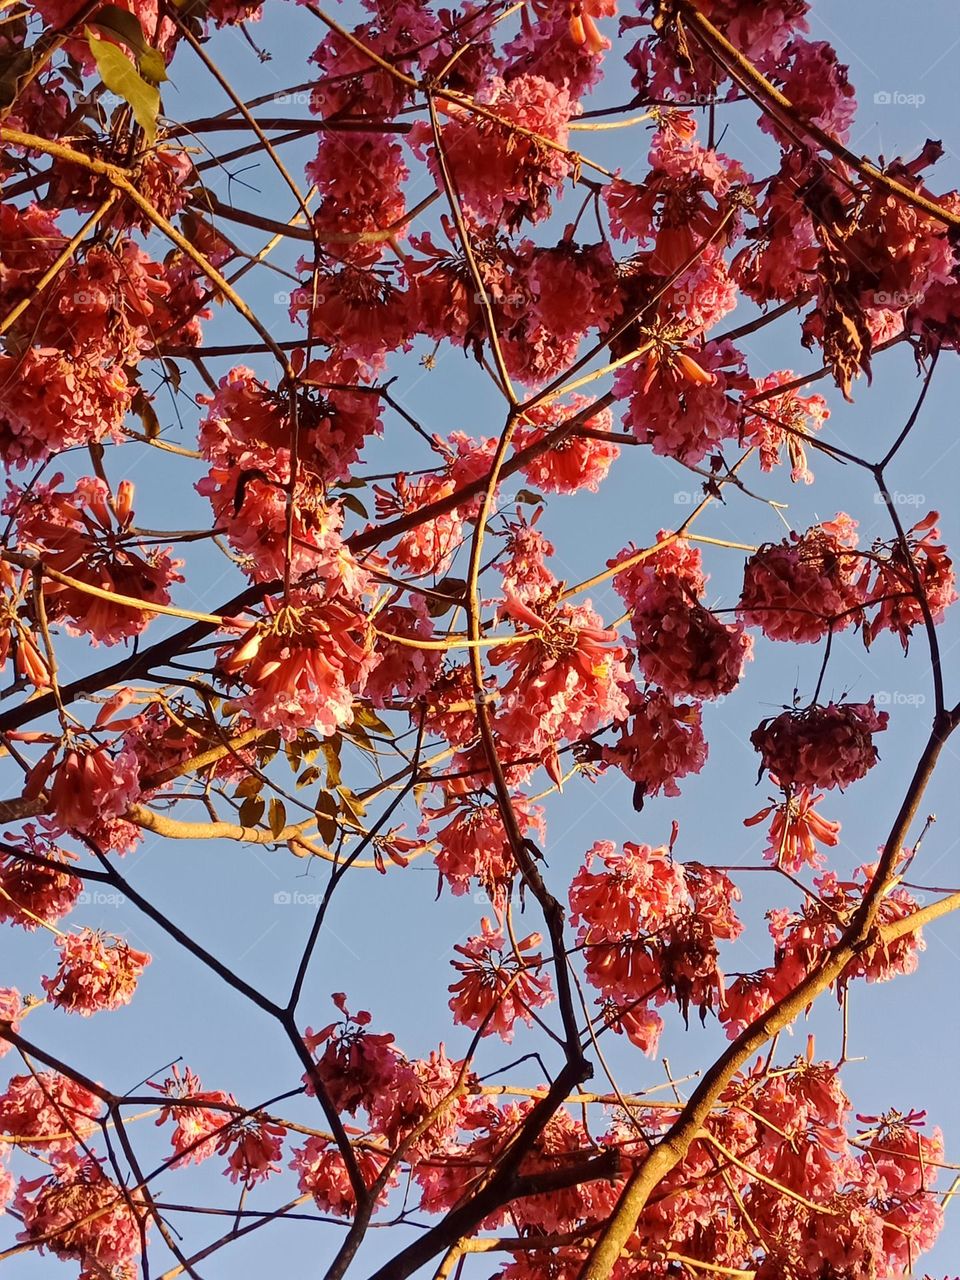 A clear sky in spring, A tree full of pinkish flowers against a blue sky